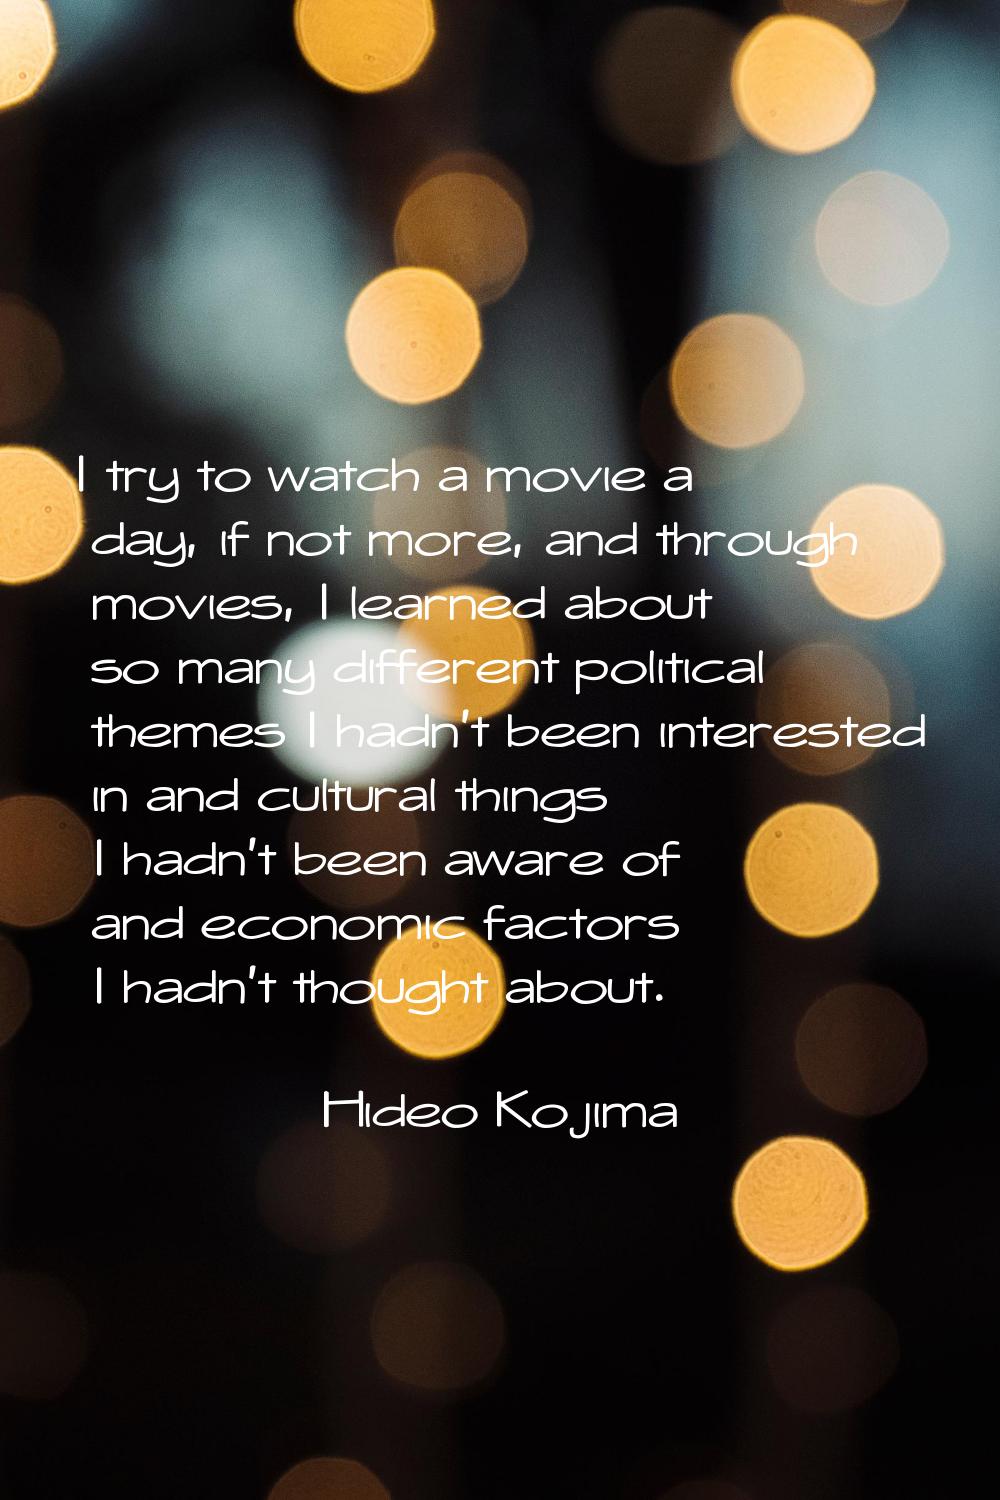 I try to watch a movie a day, if not more, and through movies, I learned about so many different po